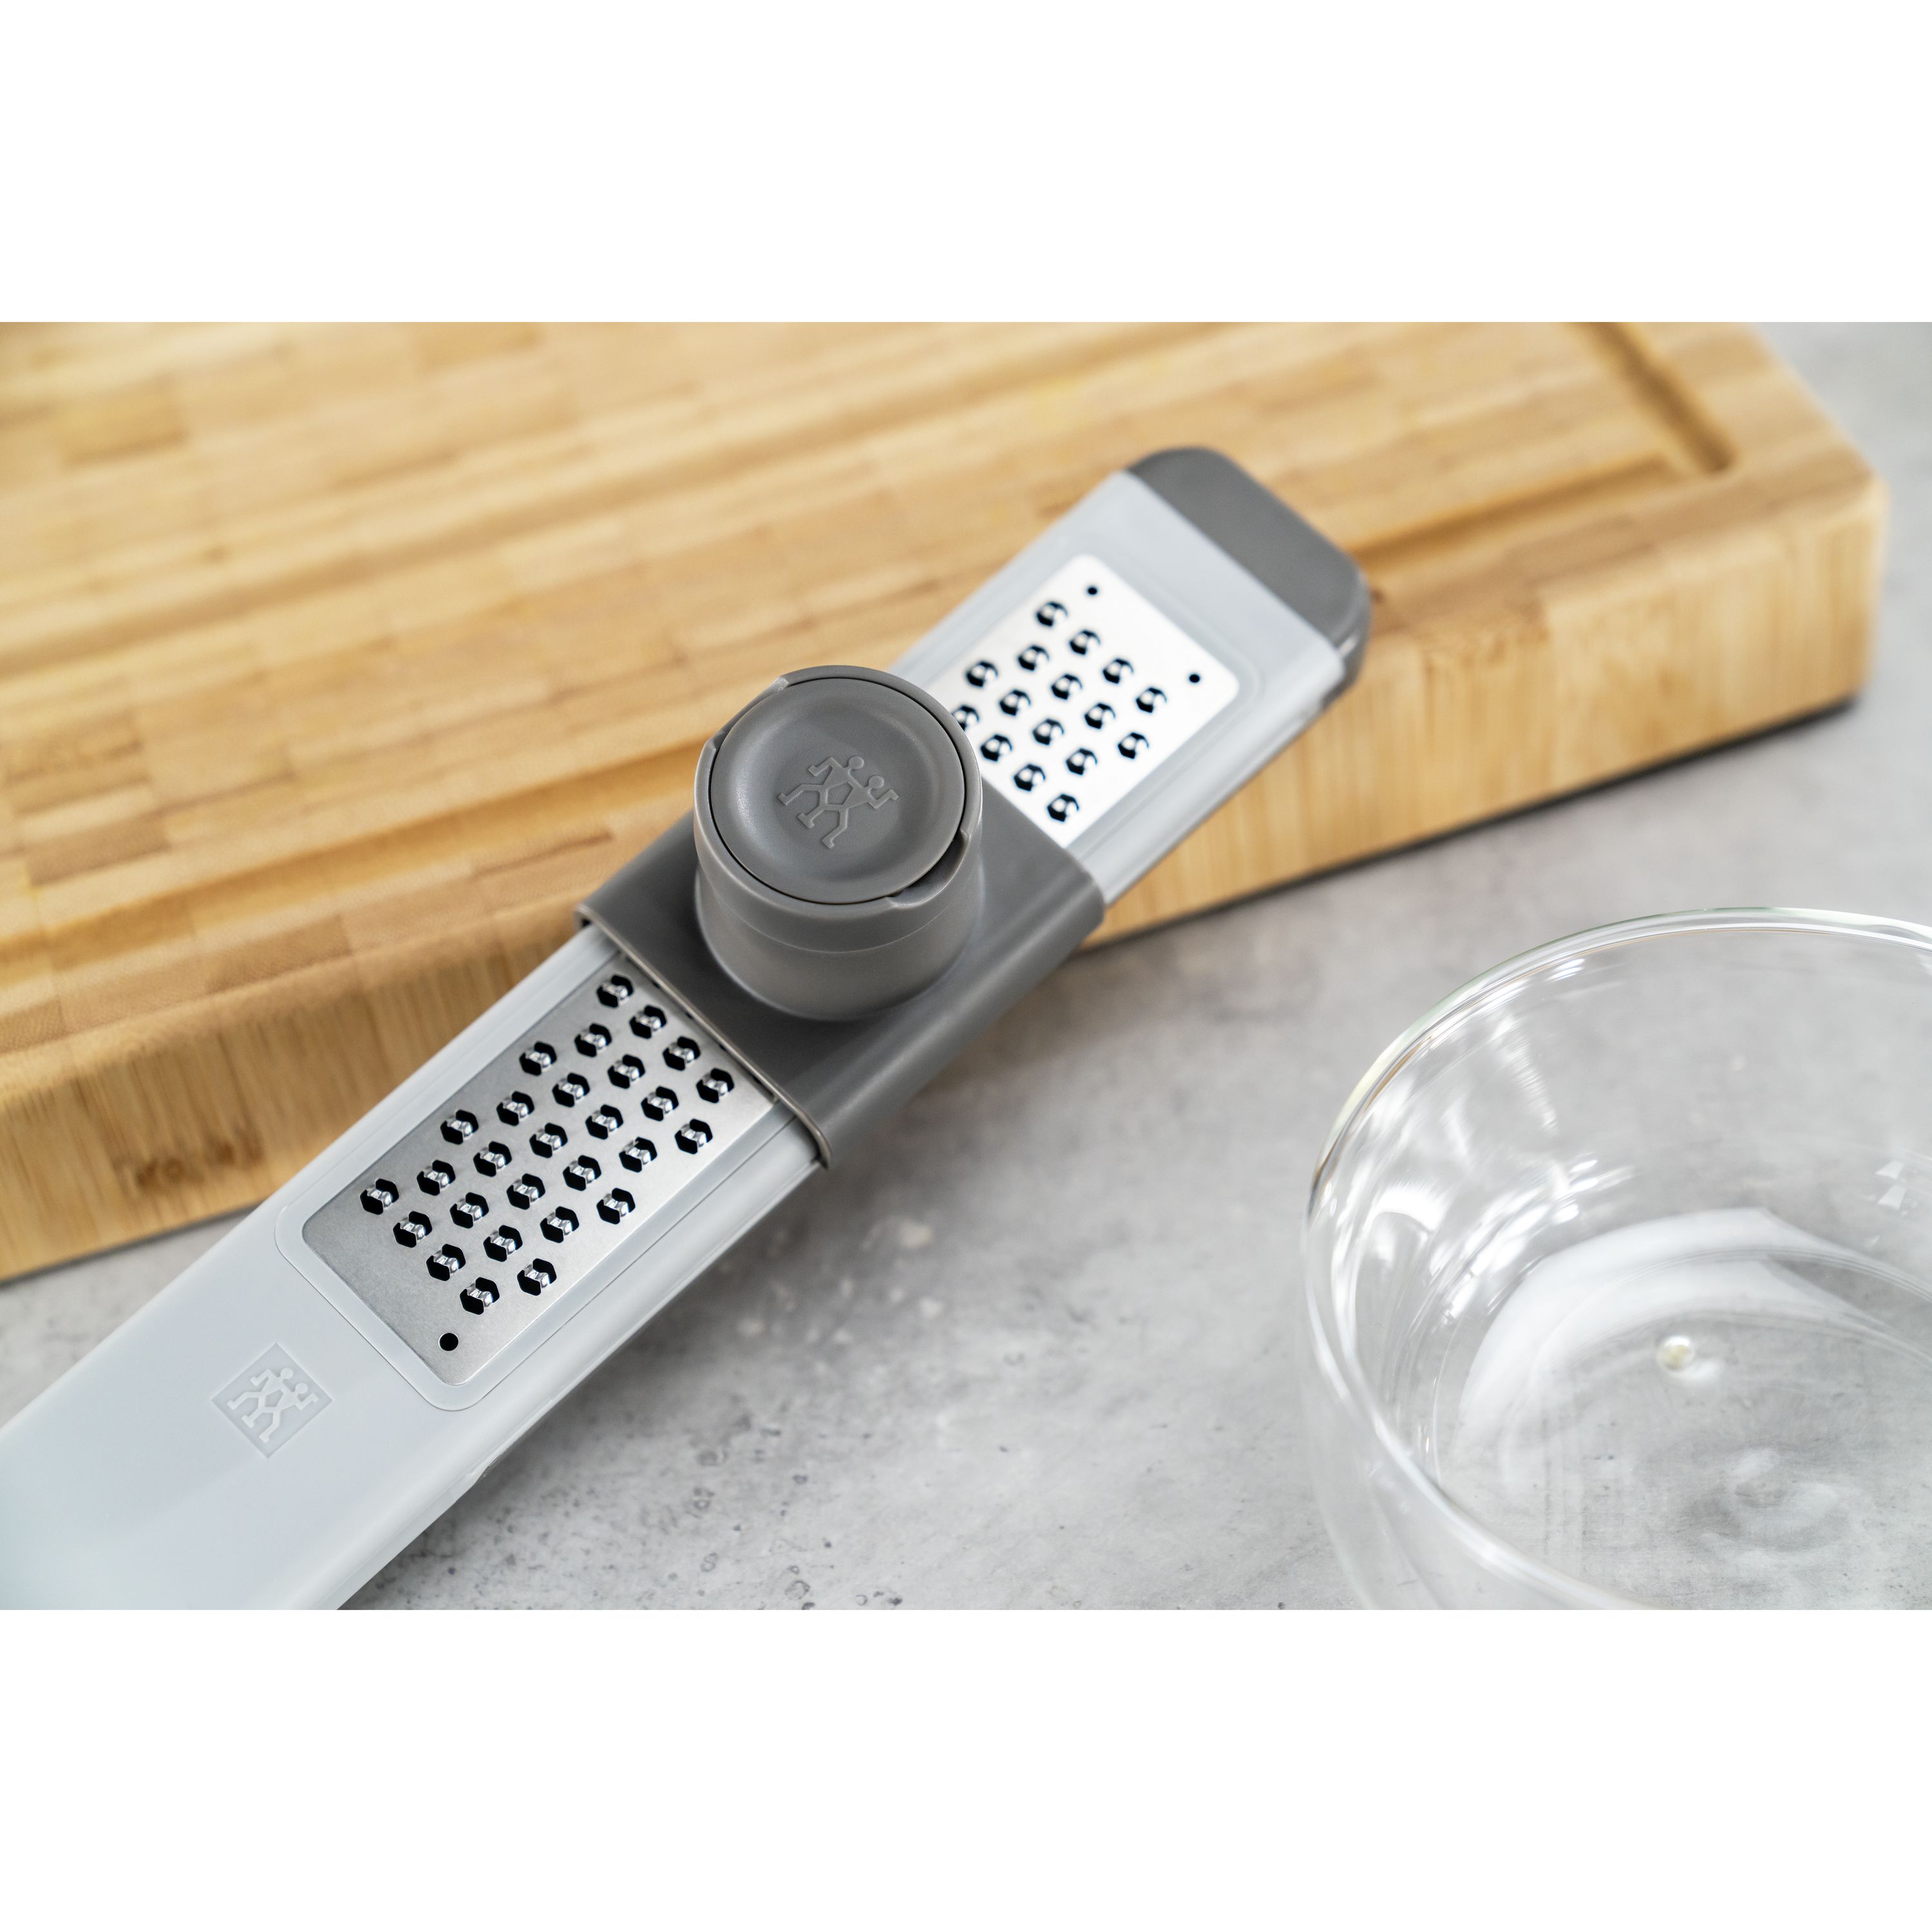 Large Cut Grater with Nonslip Grip - Elements Collection